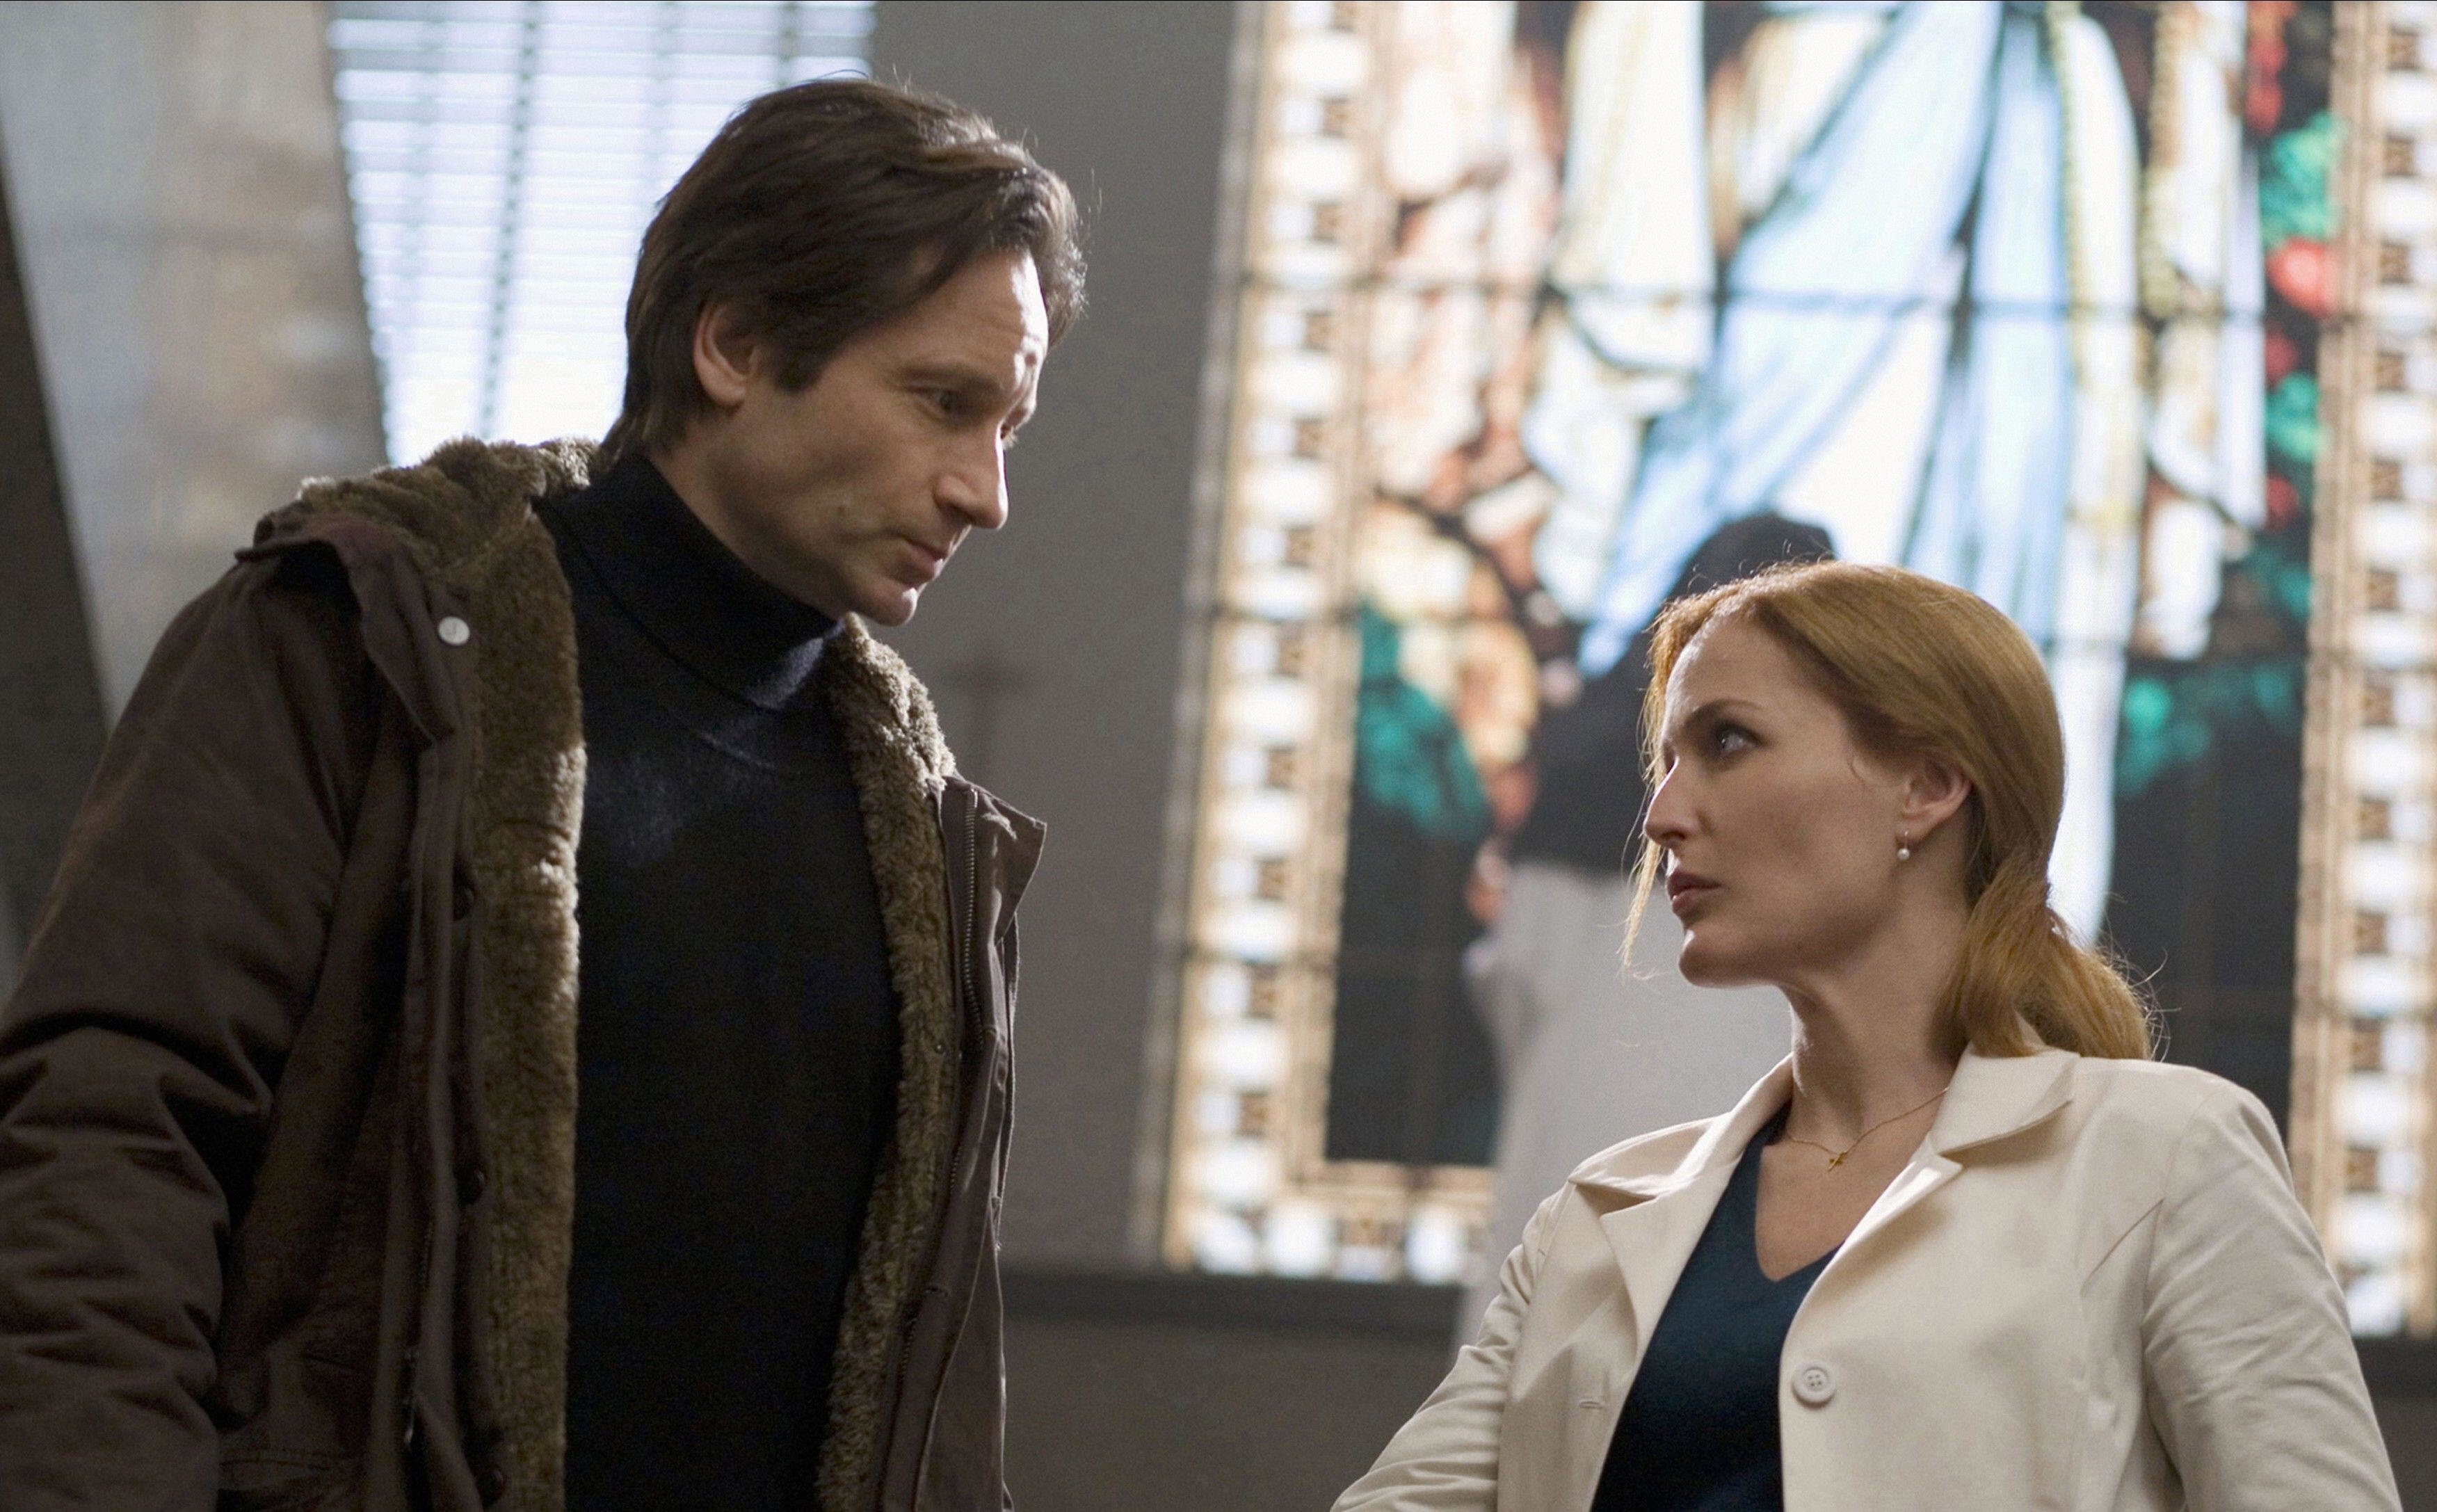 David Duchovny and Gillian Anderson trade an intense stare in a church